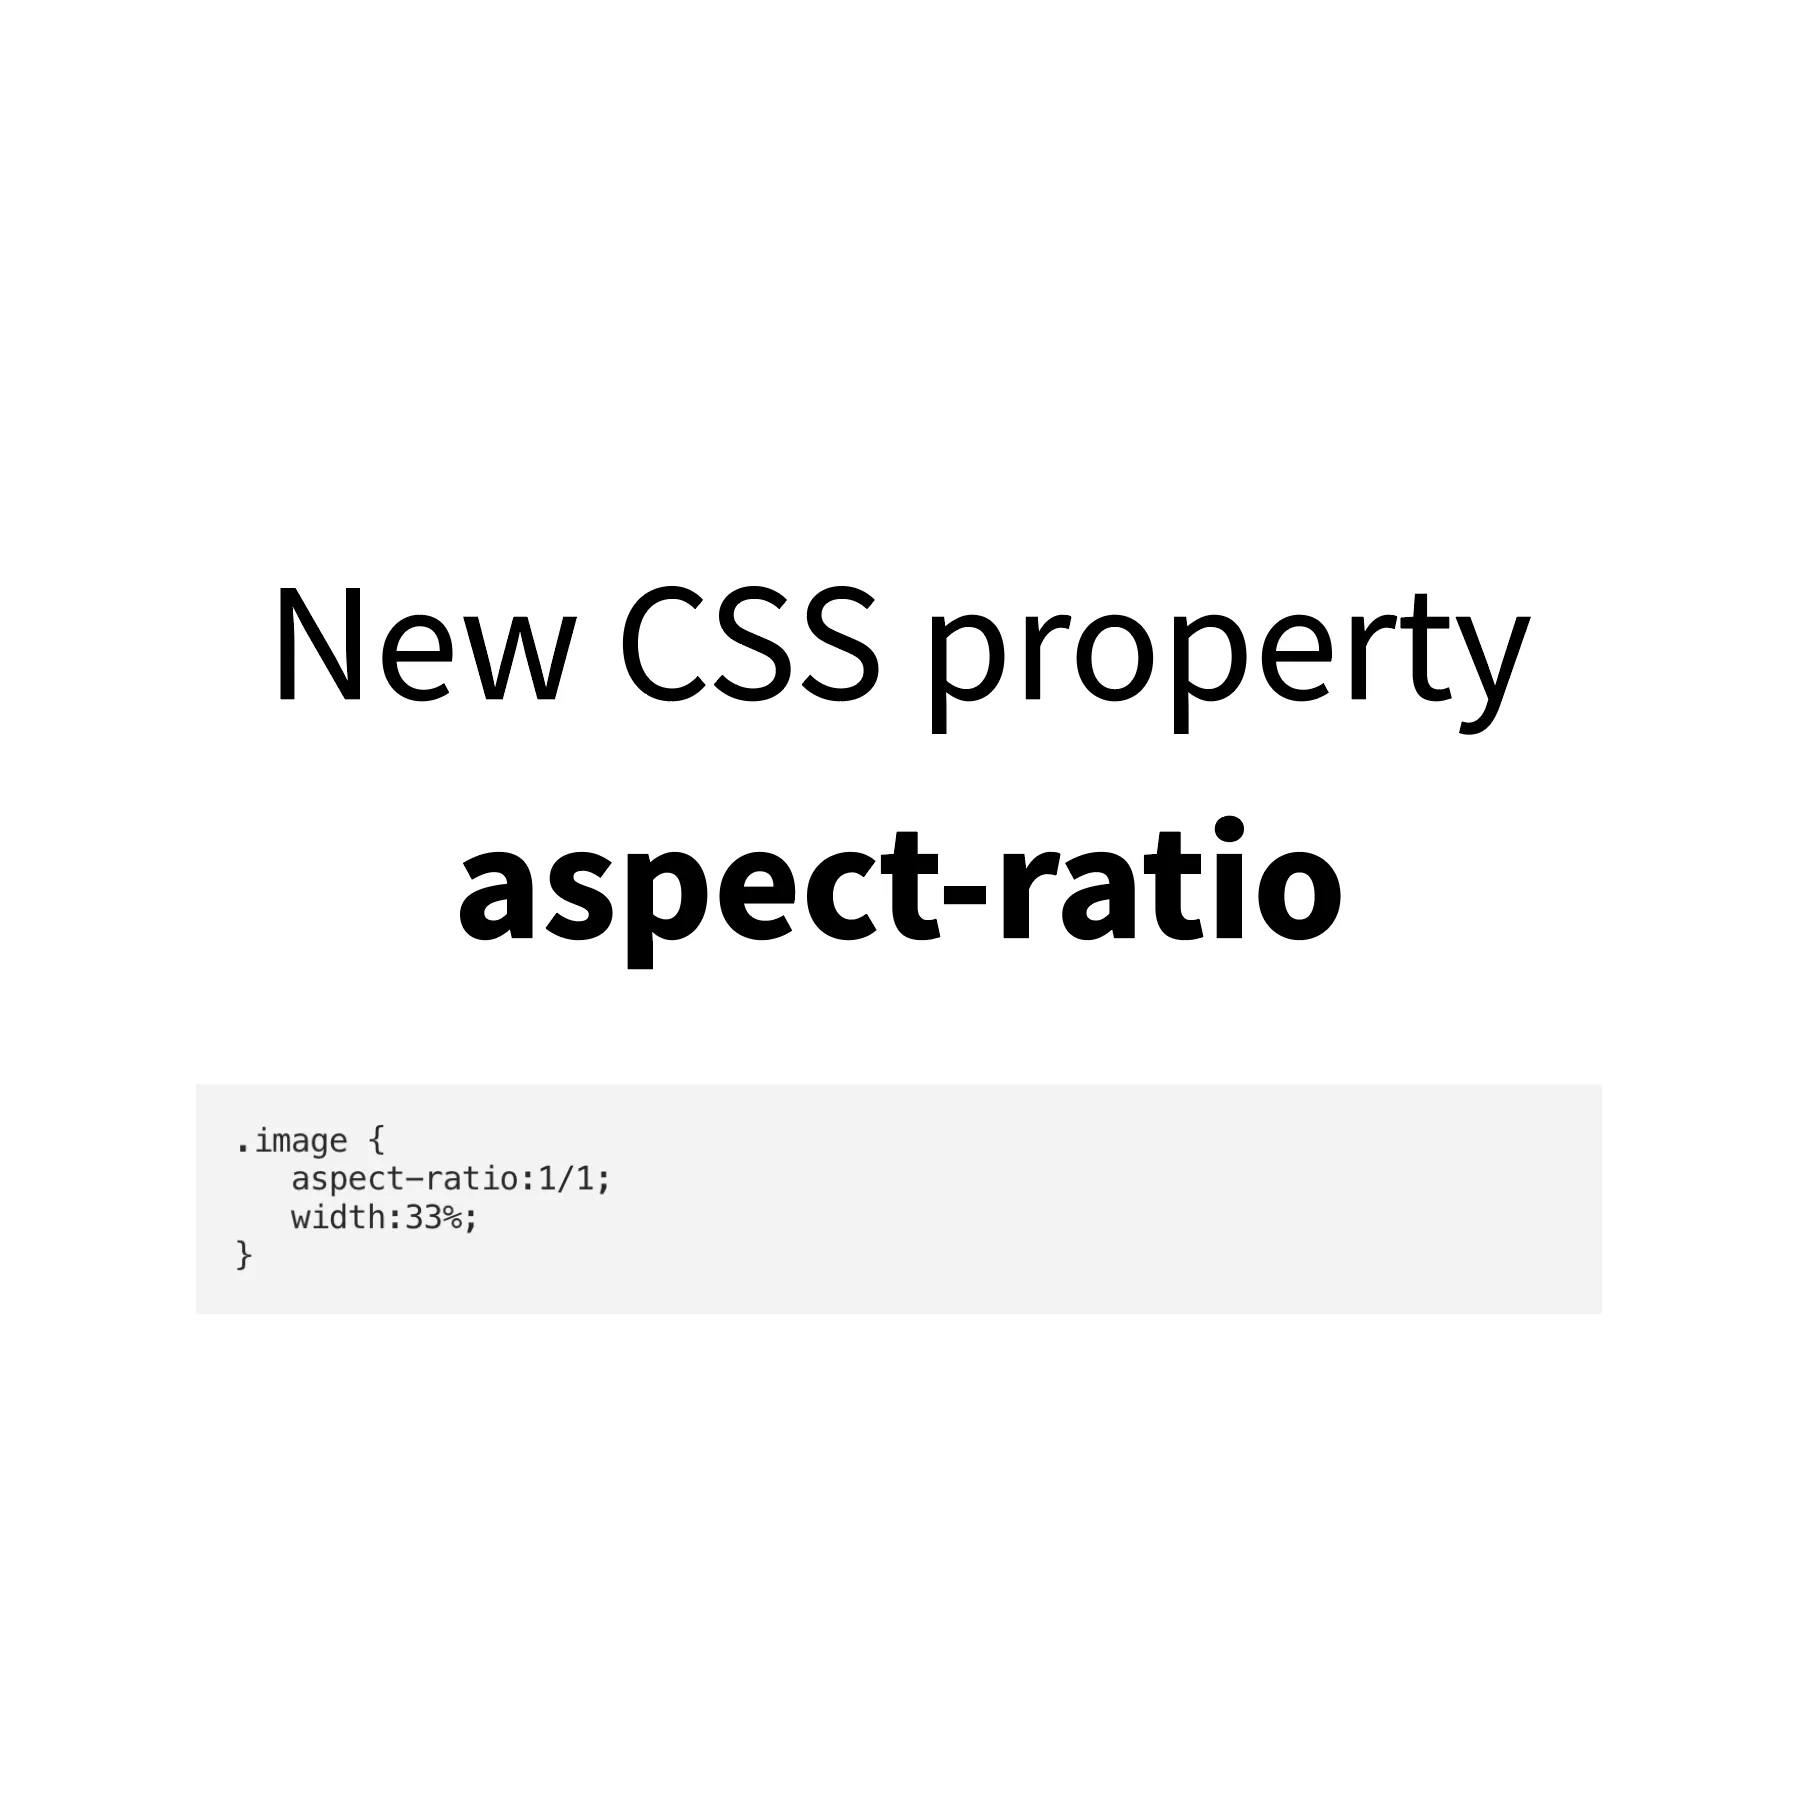 new css property: aspect-ratio image for the blog, click to view more details.